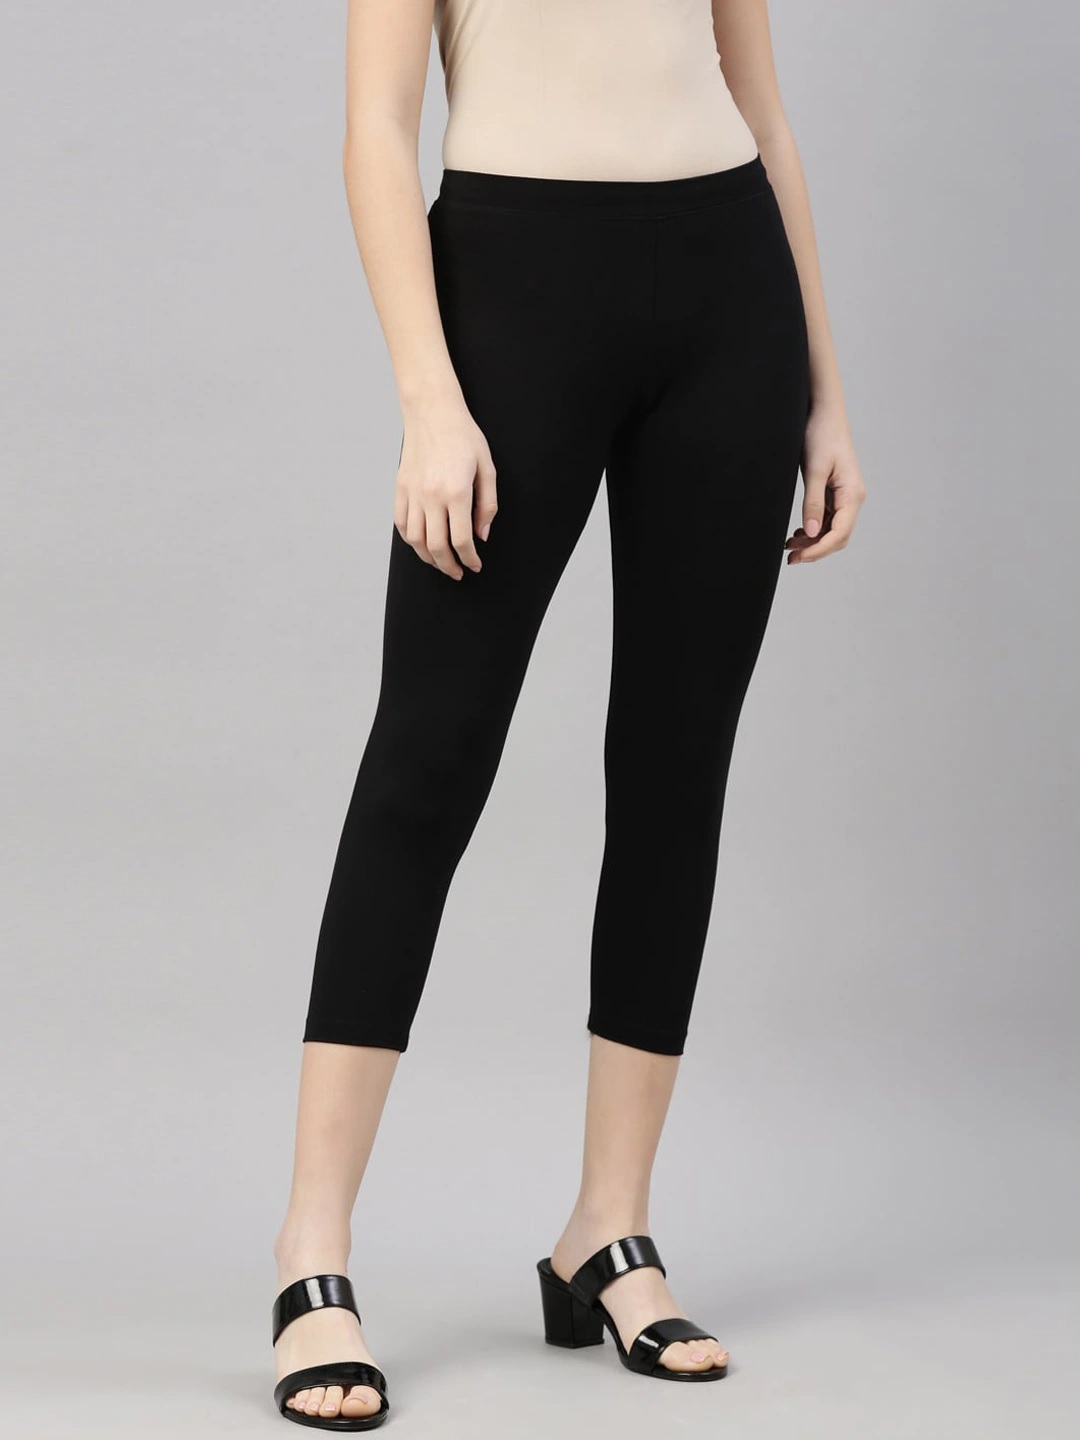 Kryptic | Kryptic womens cotton stretch solid mid ankle length legging